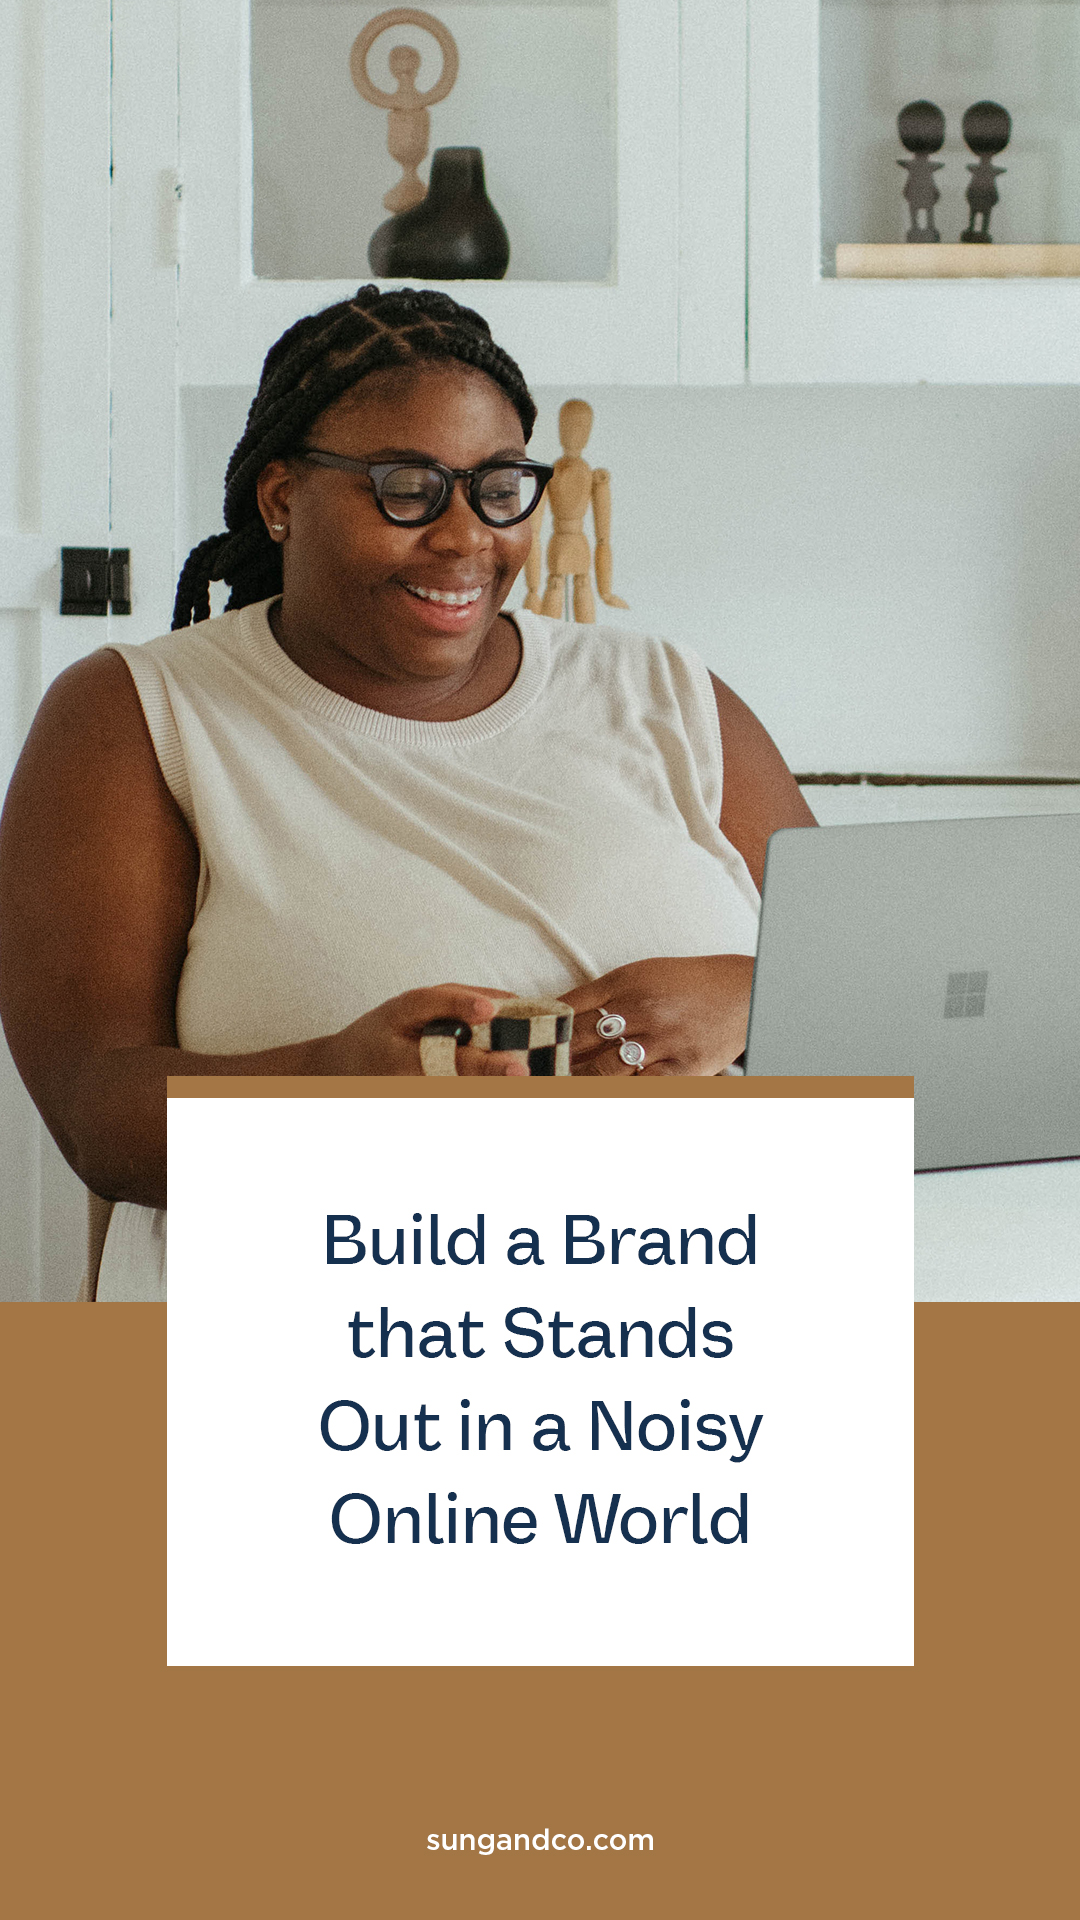 African American Small Business Owner working on branding her business that stands out in a noisy online world.